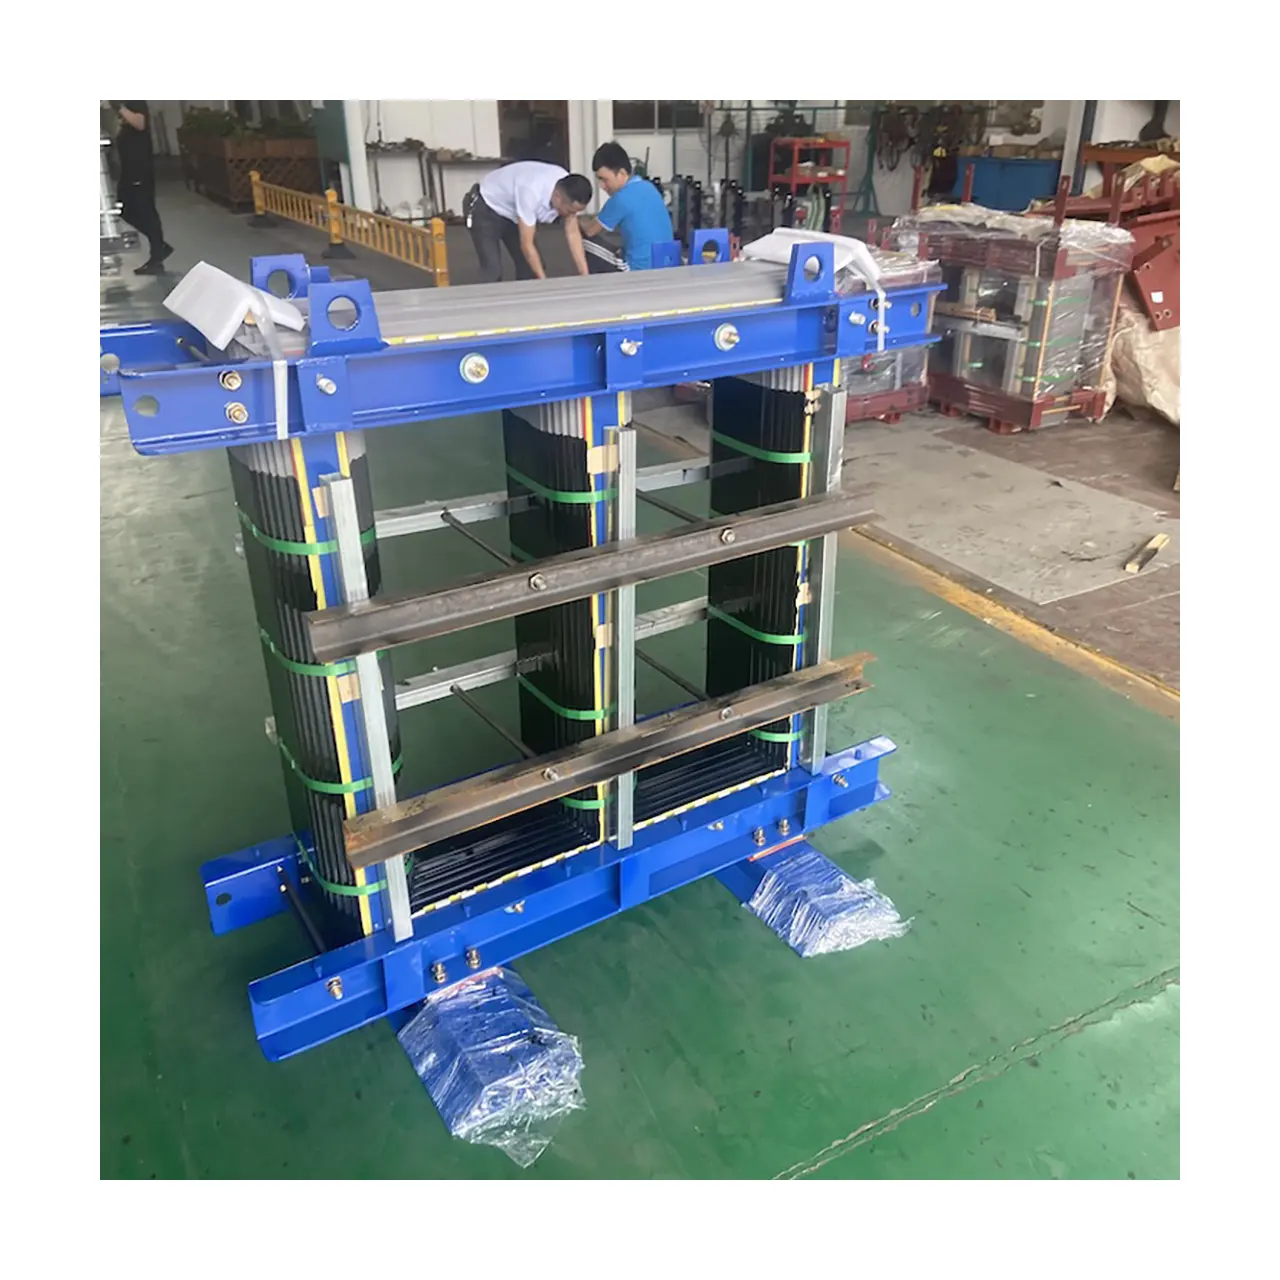 Factory Direct Lap A Transformer Is Laminated For Iron Core